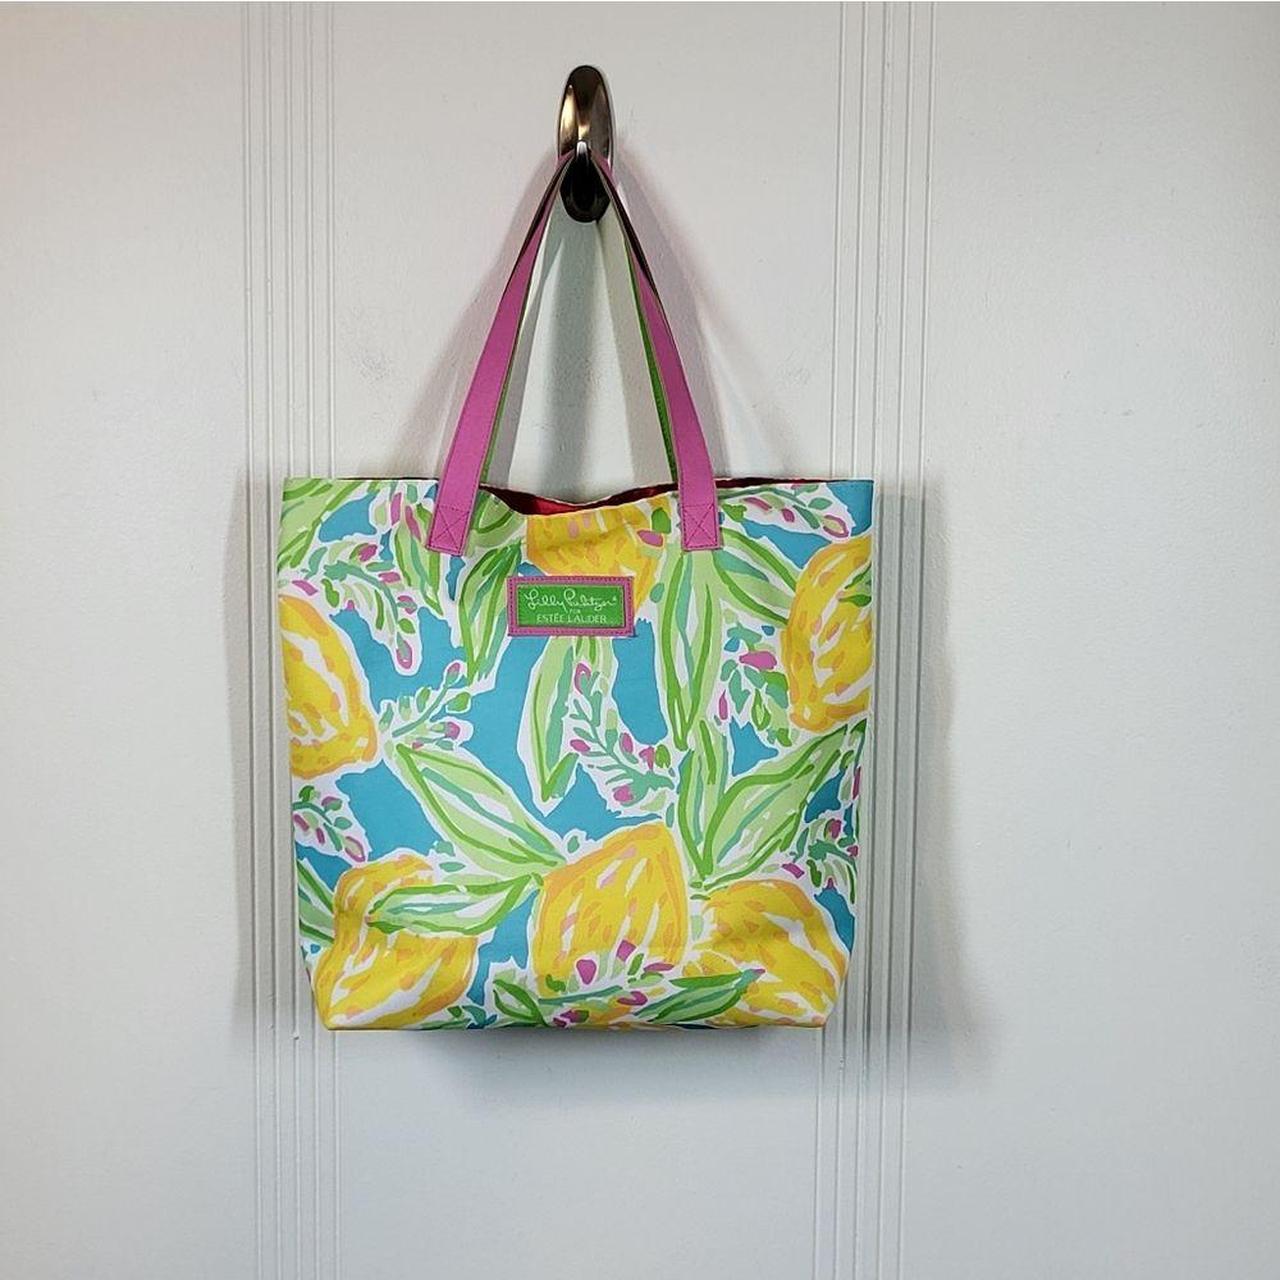 Lilly Pulitzer Women's Pink and Green Bag (2)